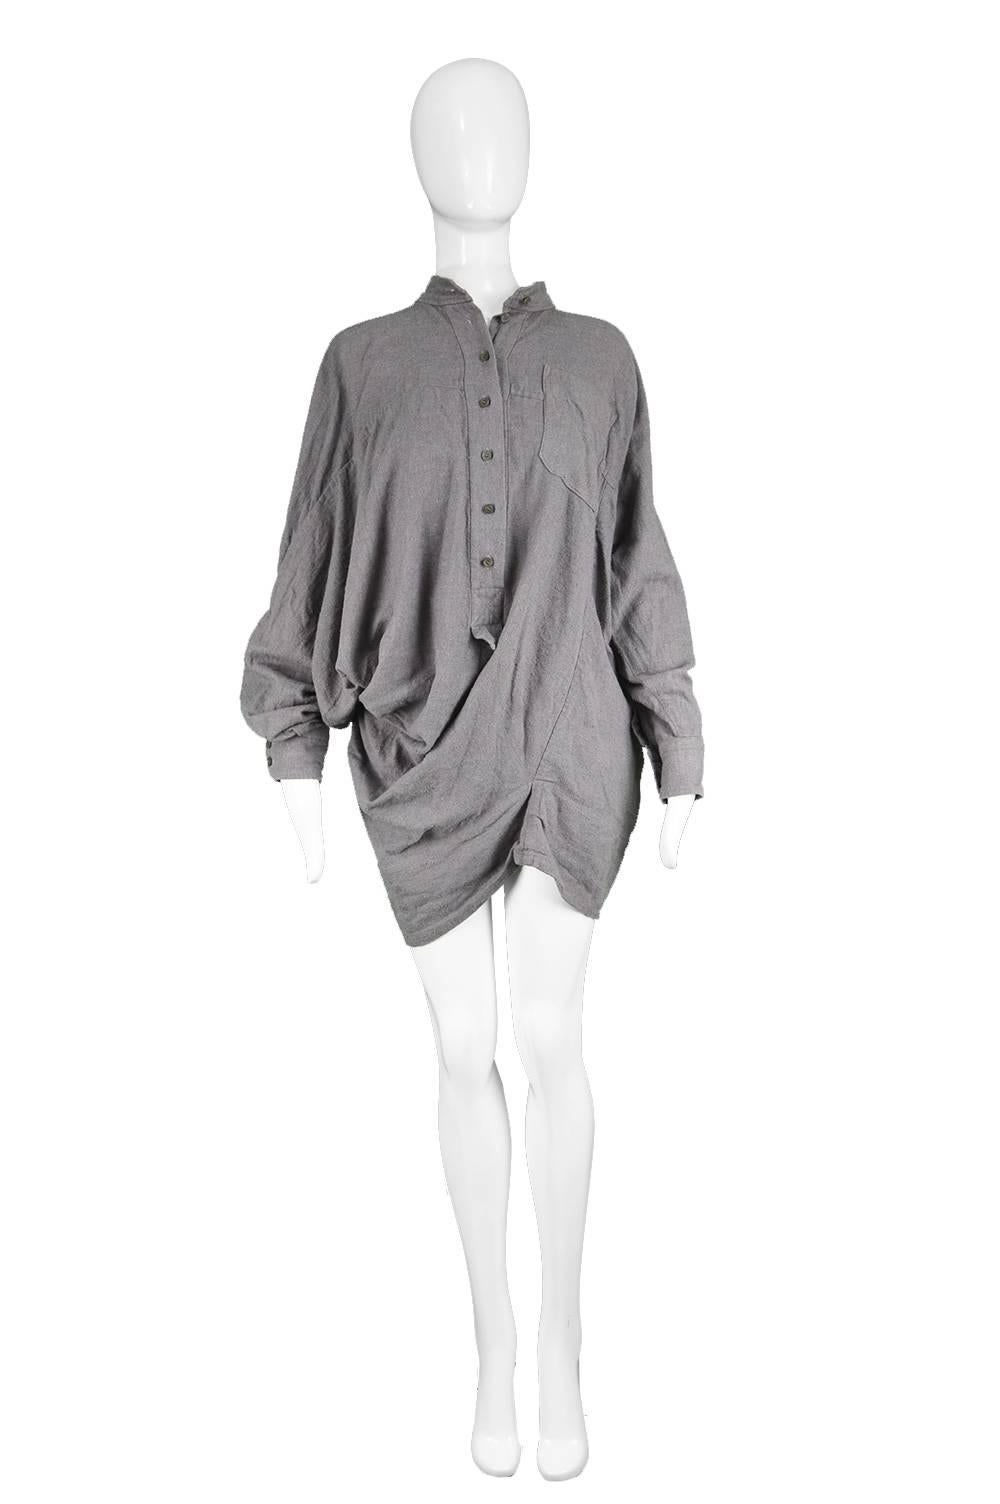 Bernard Willhelm Avant Garde Asymmetrical Draped Women's Shirtdress

Size: Best fits women's Small to Medium, as it is oversized with fitted hips.
Bust - Free due to design
Waist - Free
Hips - Up to 42” / 106cm
Length (Shoulder to Hem) - 30” /